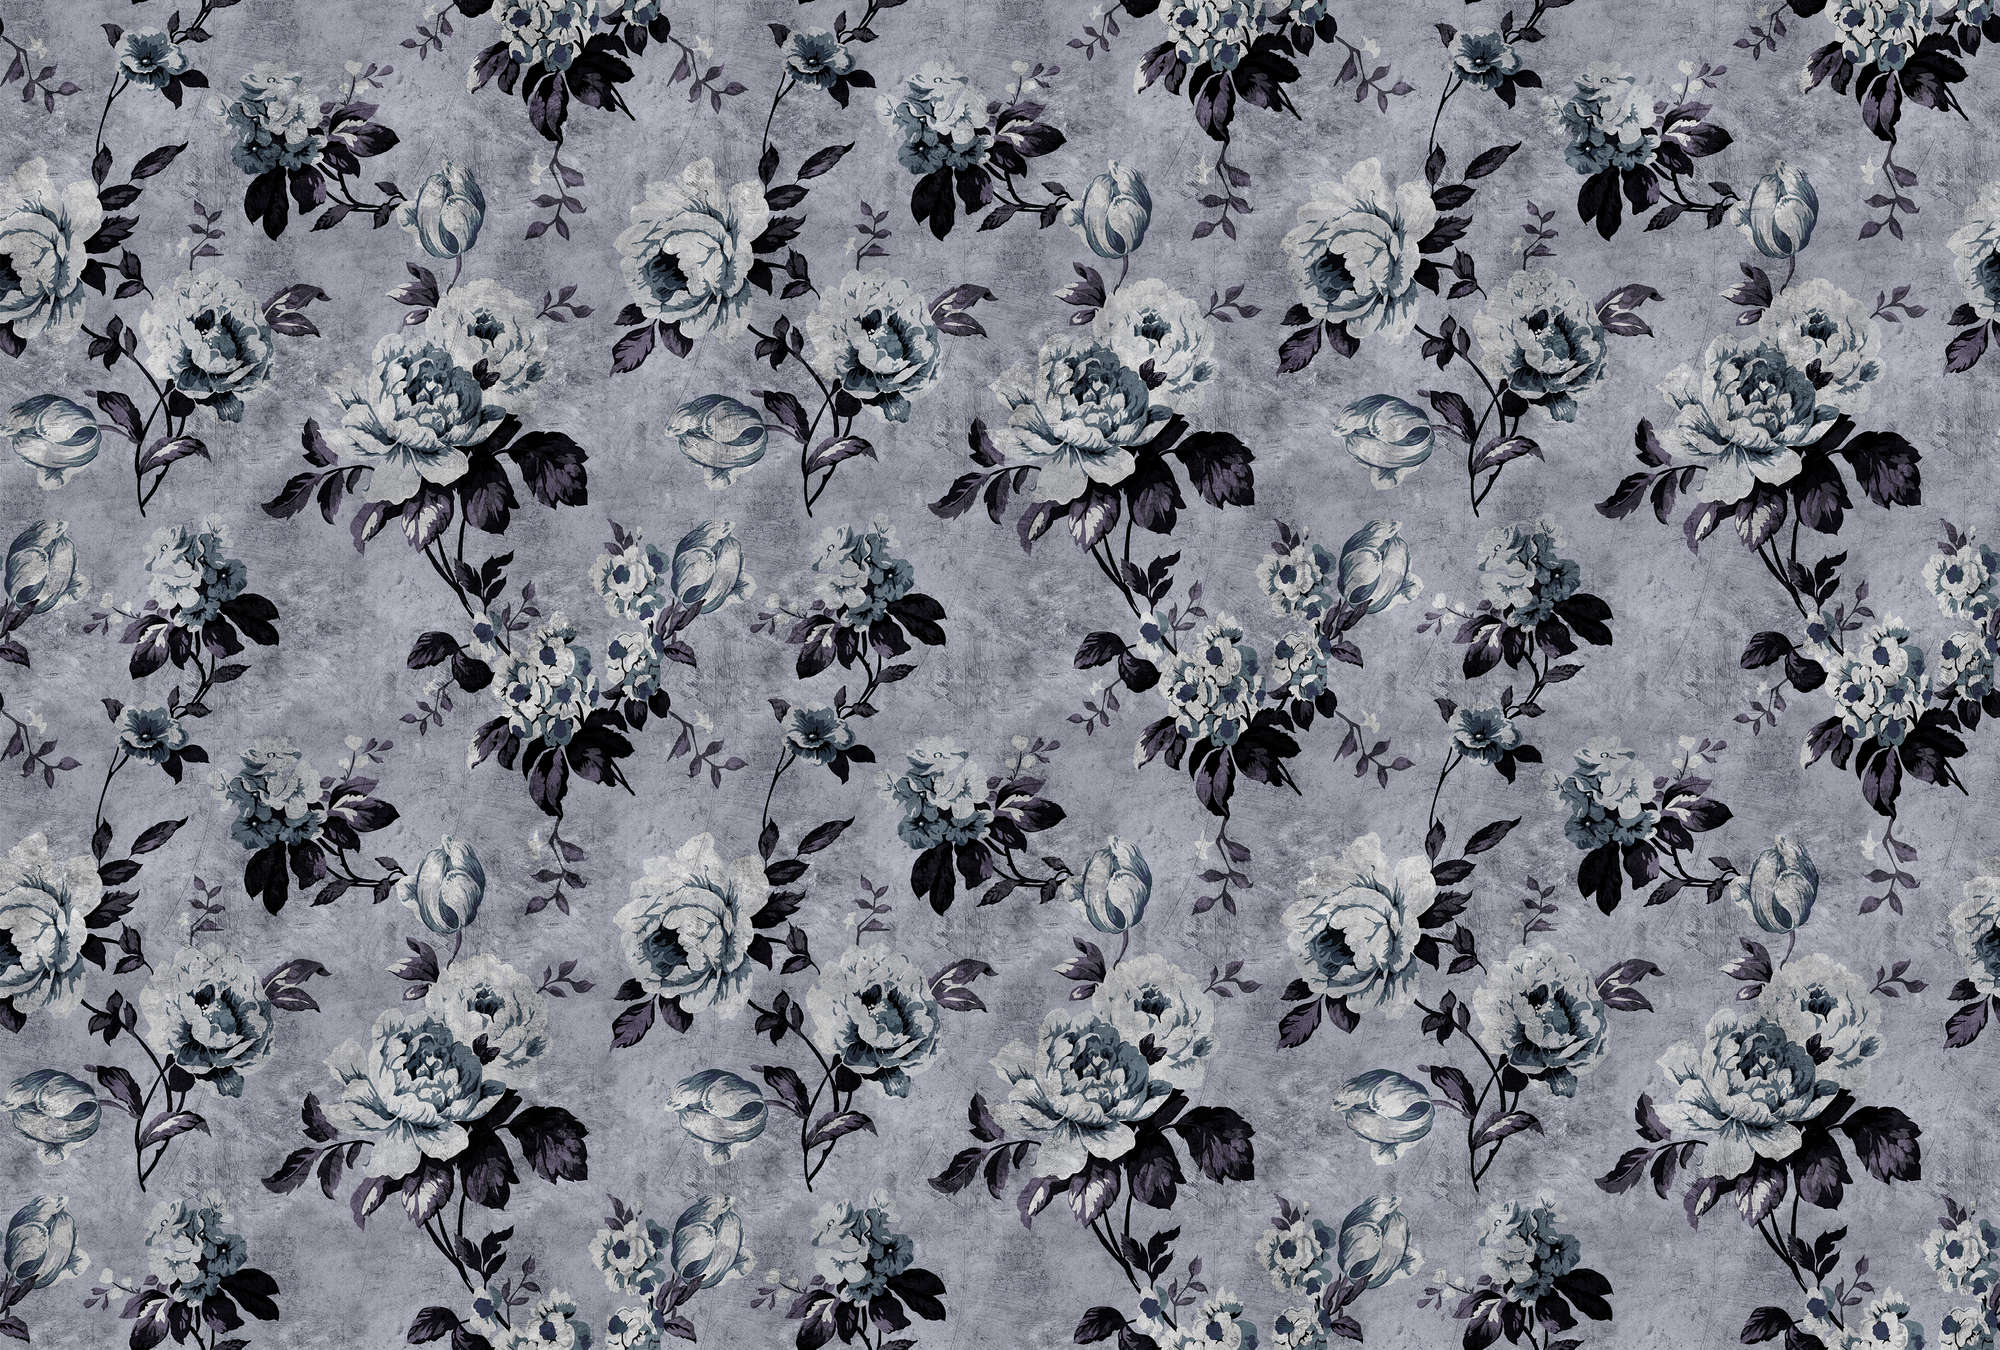             Wild roses 6 - Rose wallpaper in retro look, grey in scratchy structure - Blue, Violet | Matt smooth non-woven
        